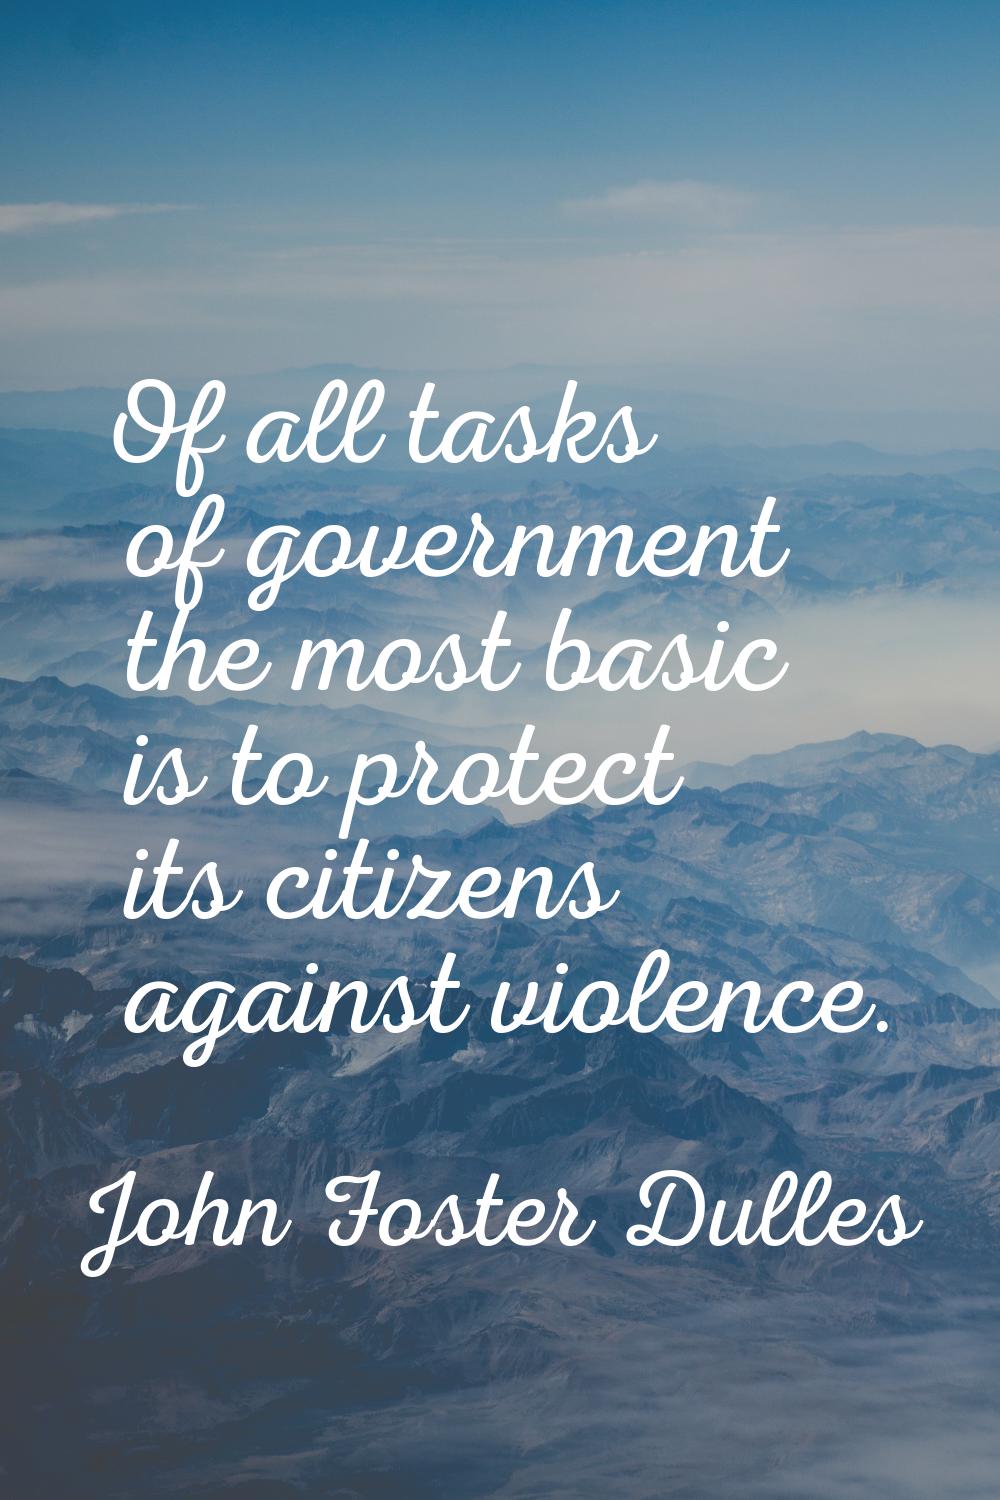 Of all tasks of government the most basic is to protect its citizens against violence.